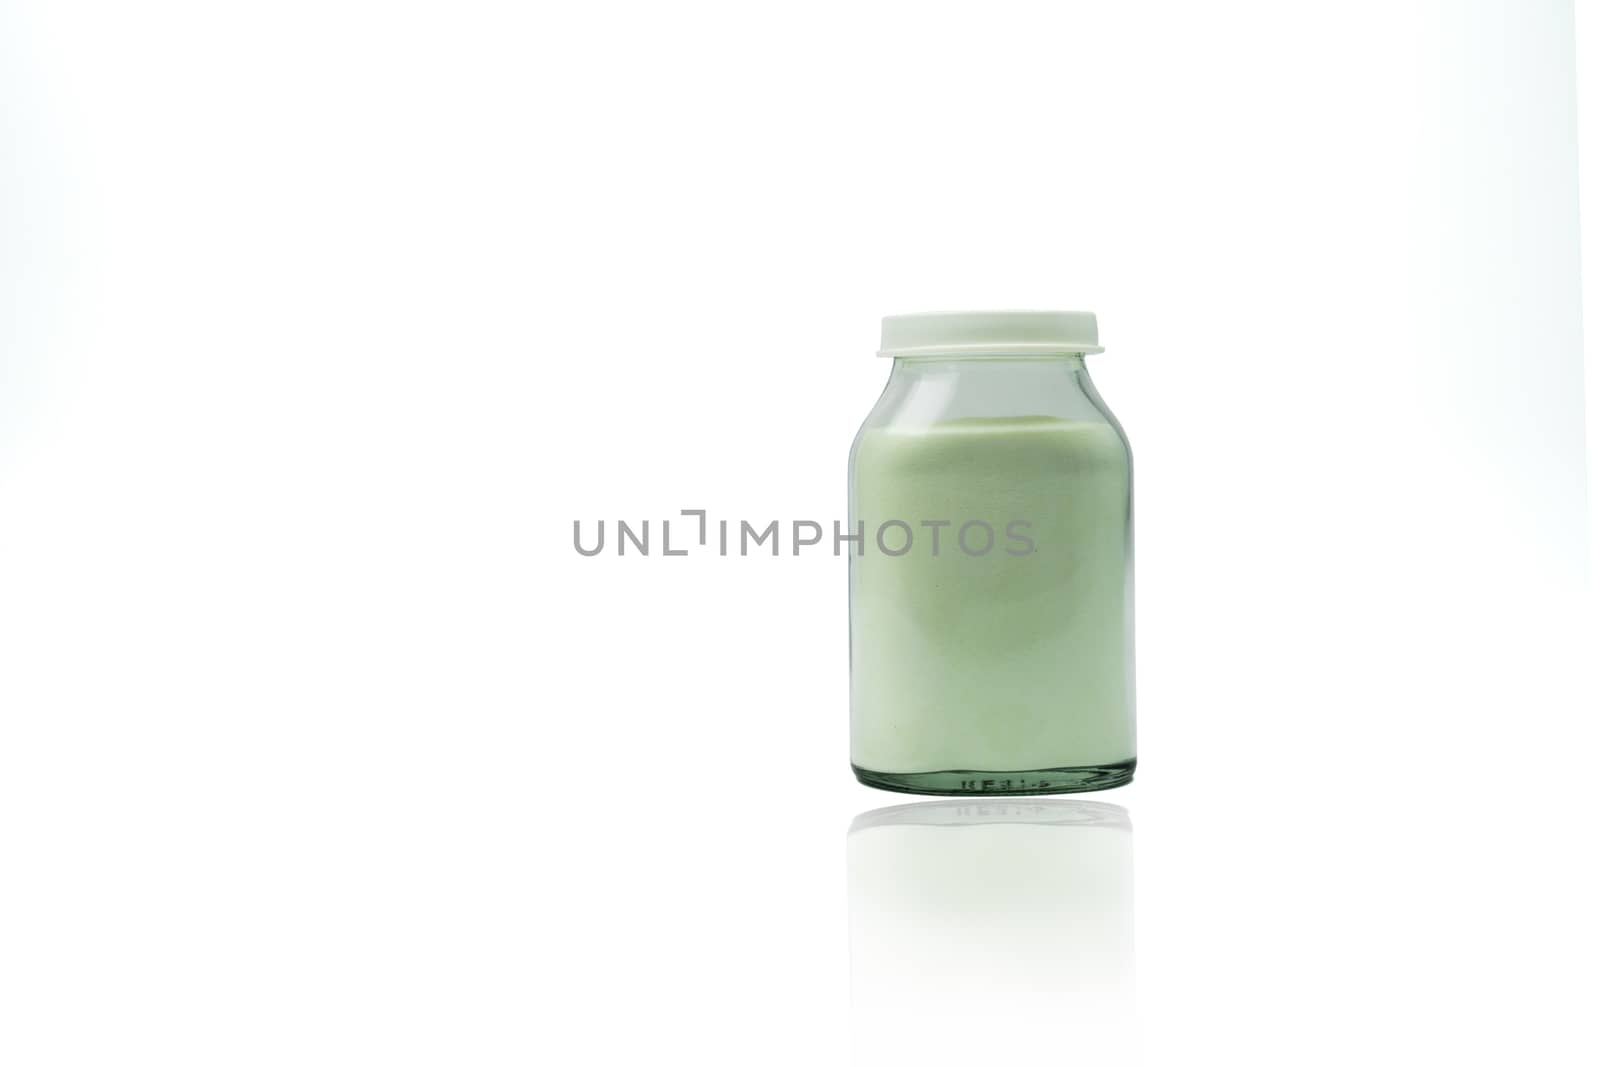 Green lemon flavored effervescent powders in transparent glass bottle with blank label and copy space isolated on white background. Pharmaceutical packaging industry.